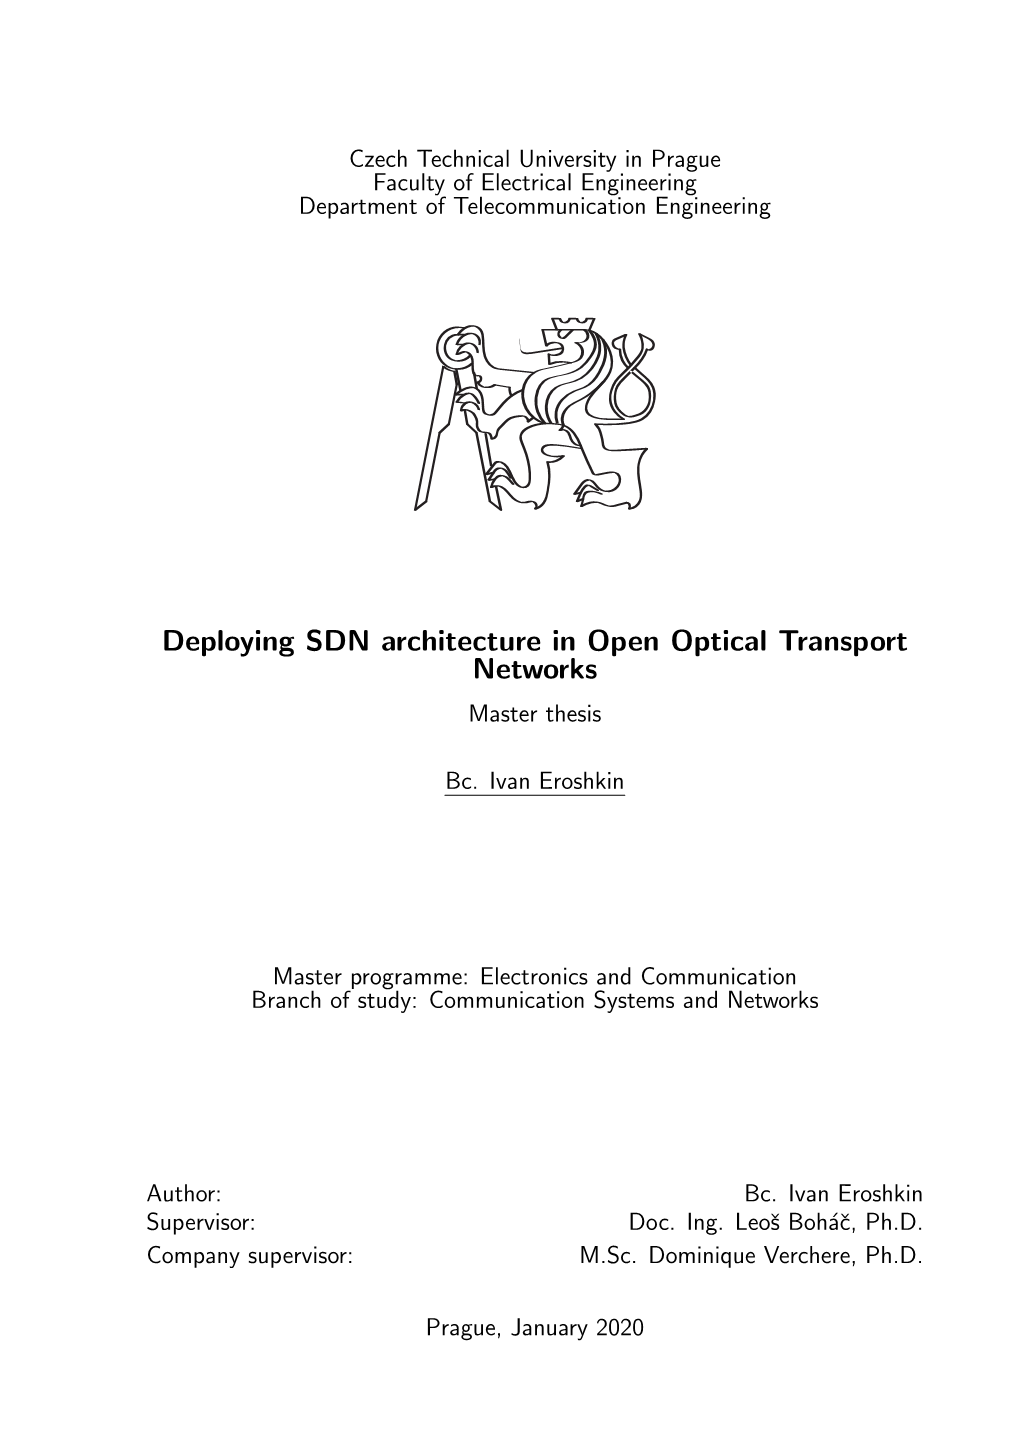 Deploying SDN Architecture in Open Optical Transport Networks Master Thesis